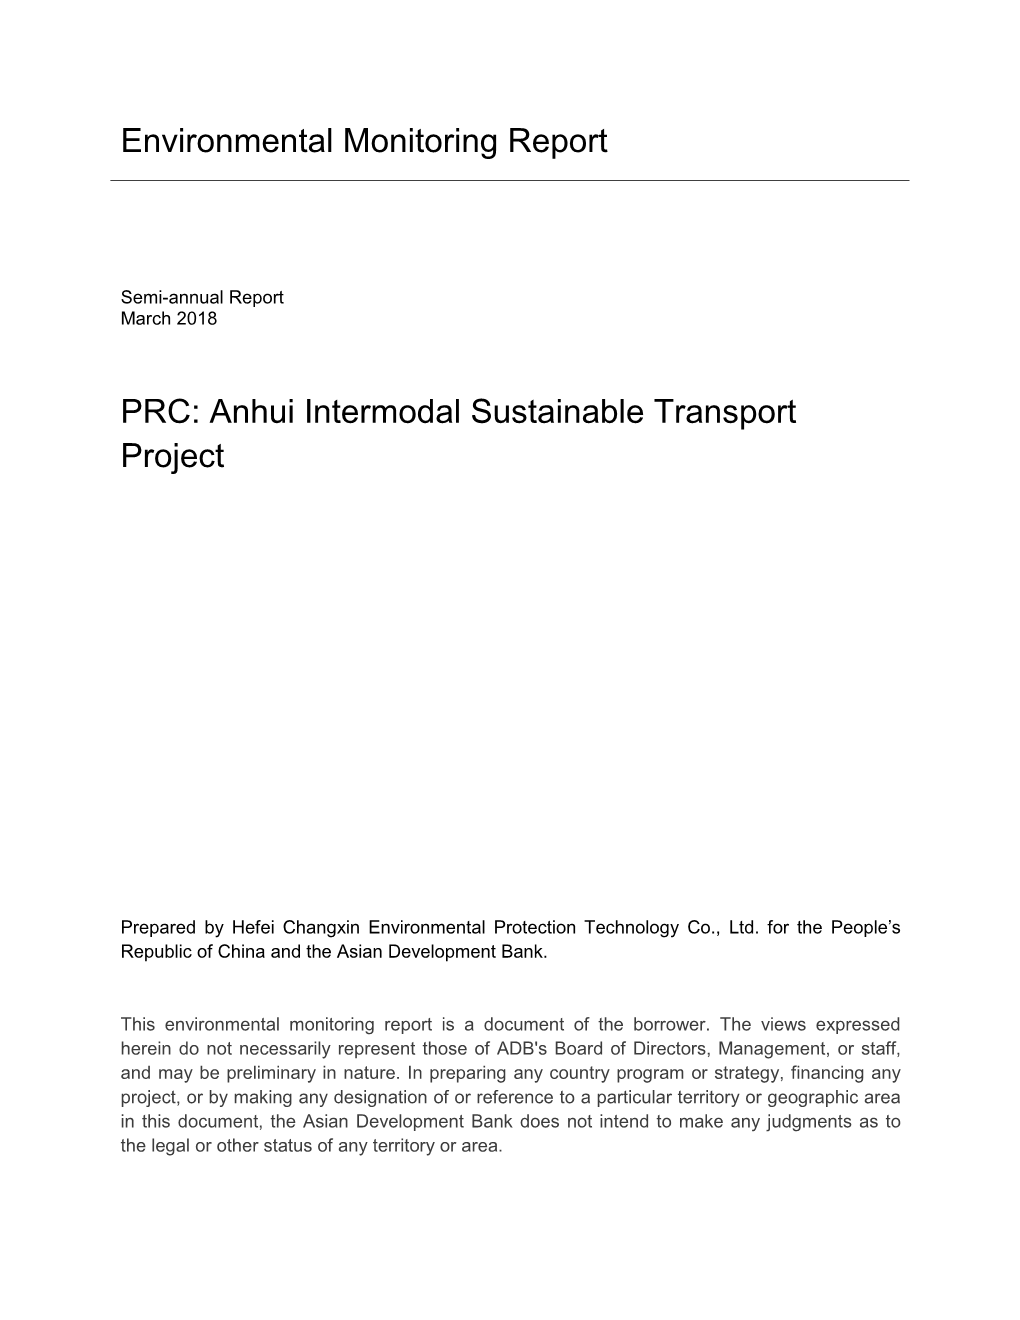 Anhui Intermodal Sustainable Transport Project: Bird Ecological